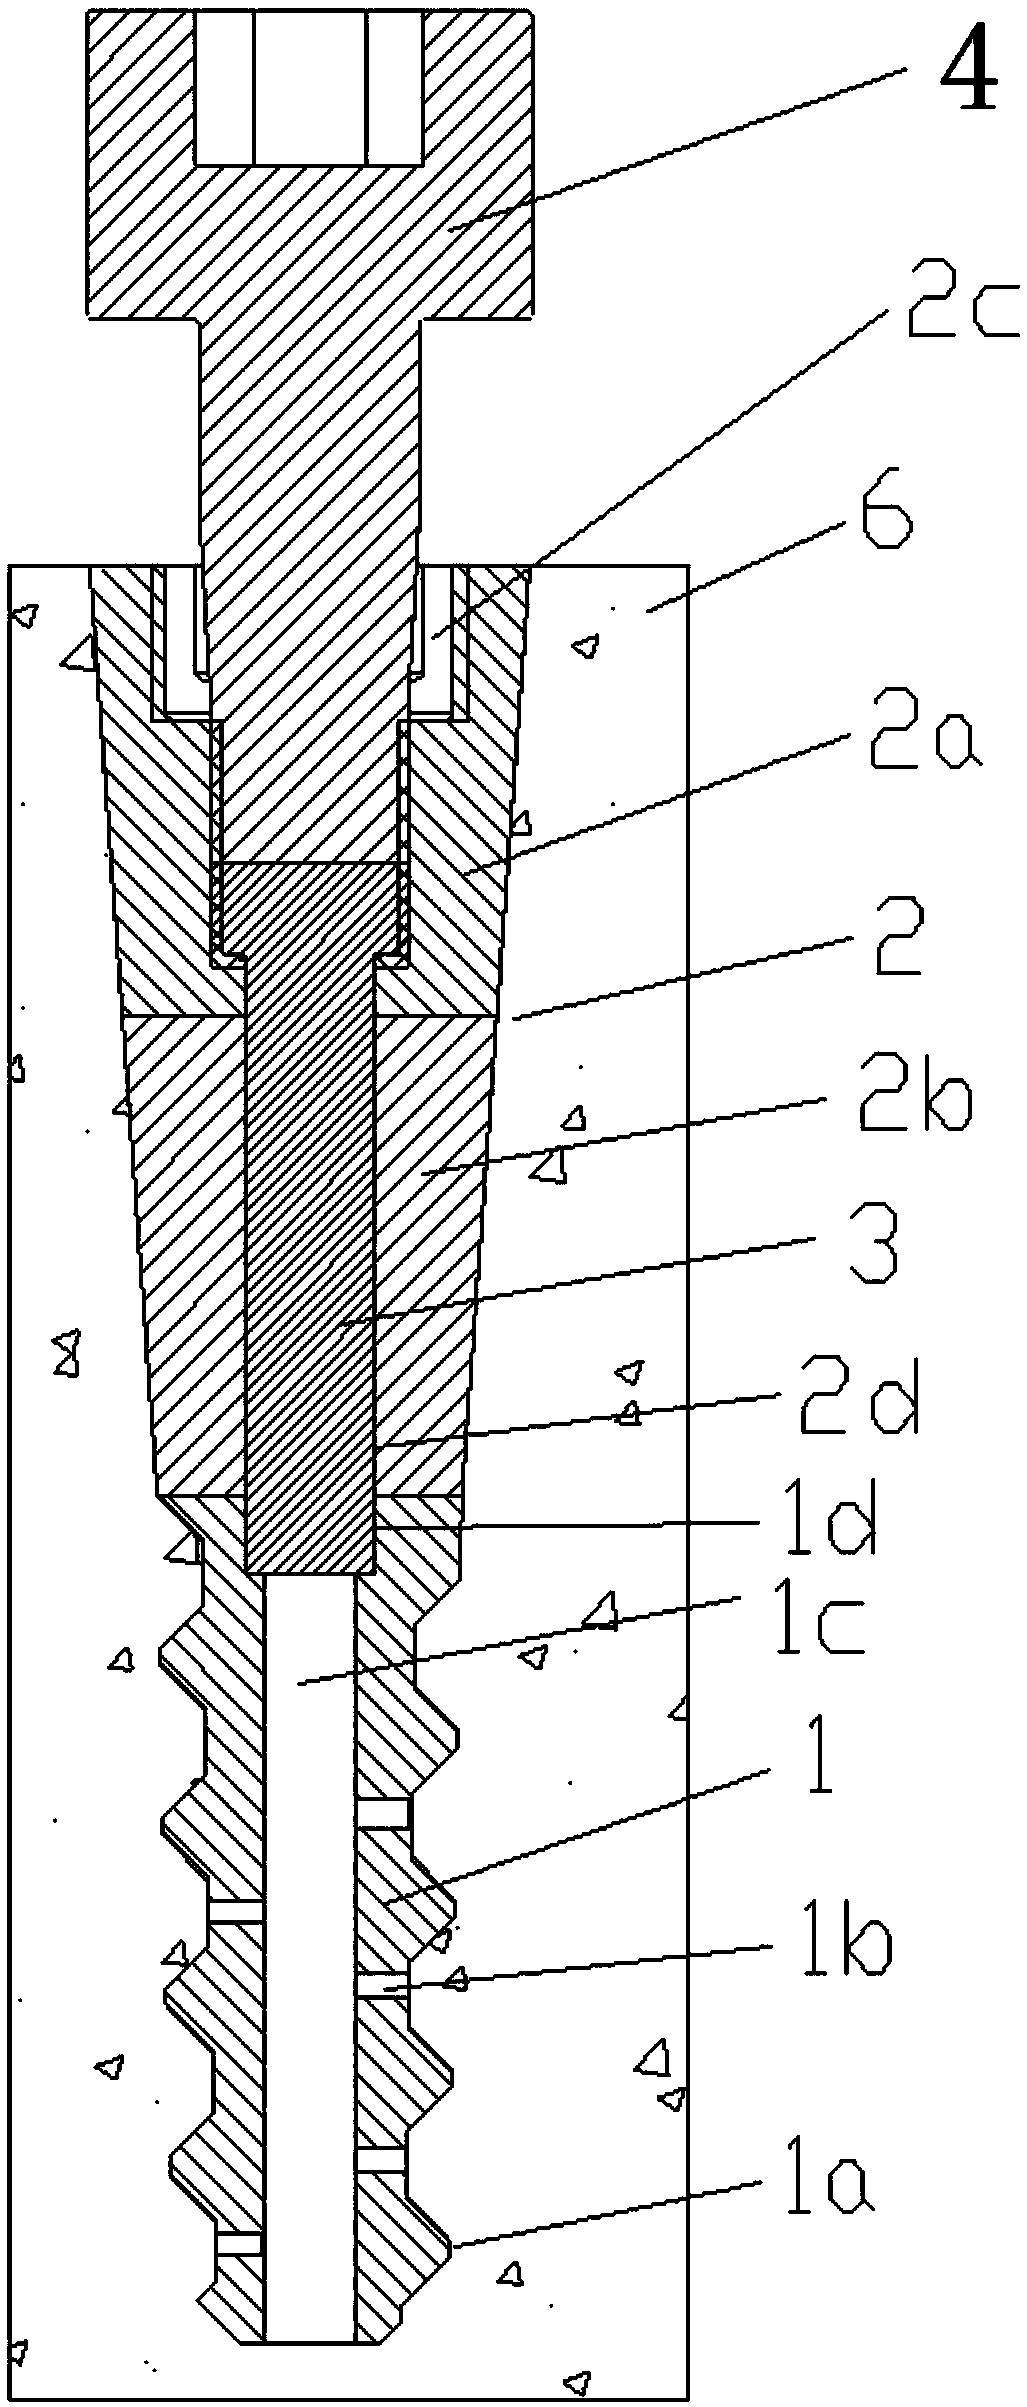 A segmented removable concrete pre-embedded screw and its application method